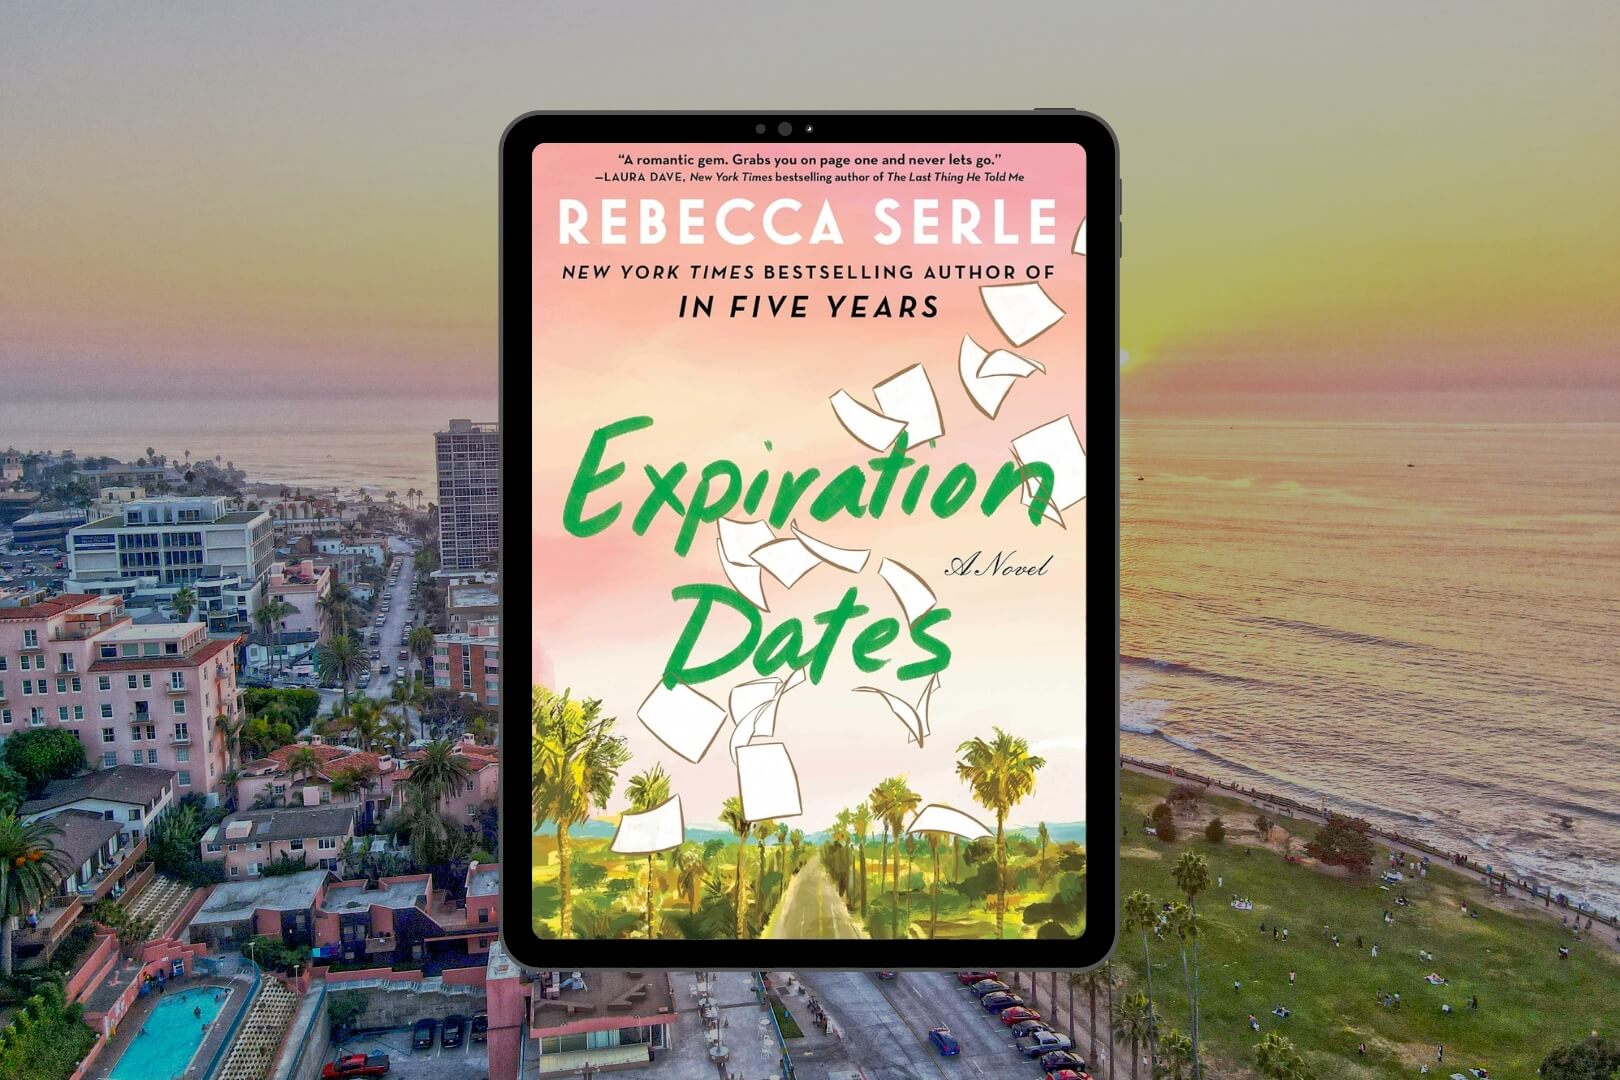 Book Club Questions for Expiration Dates by Rebecca Serle